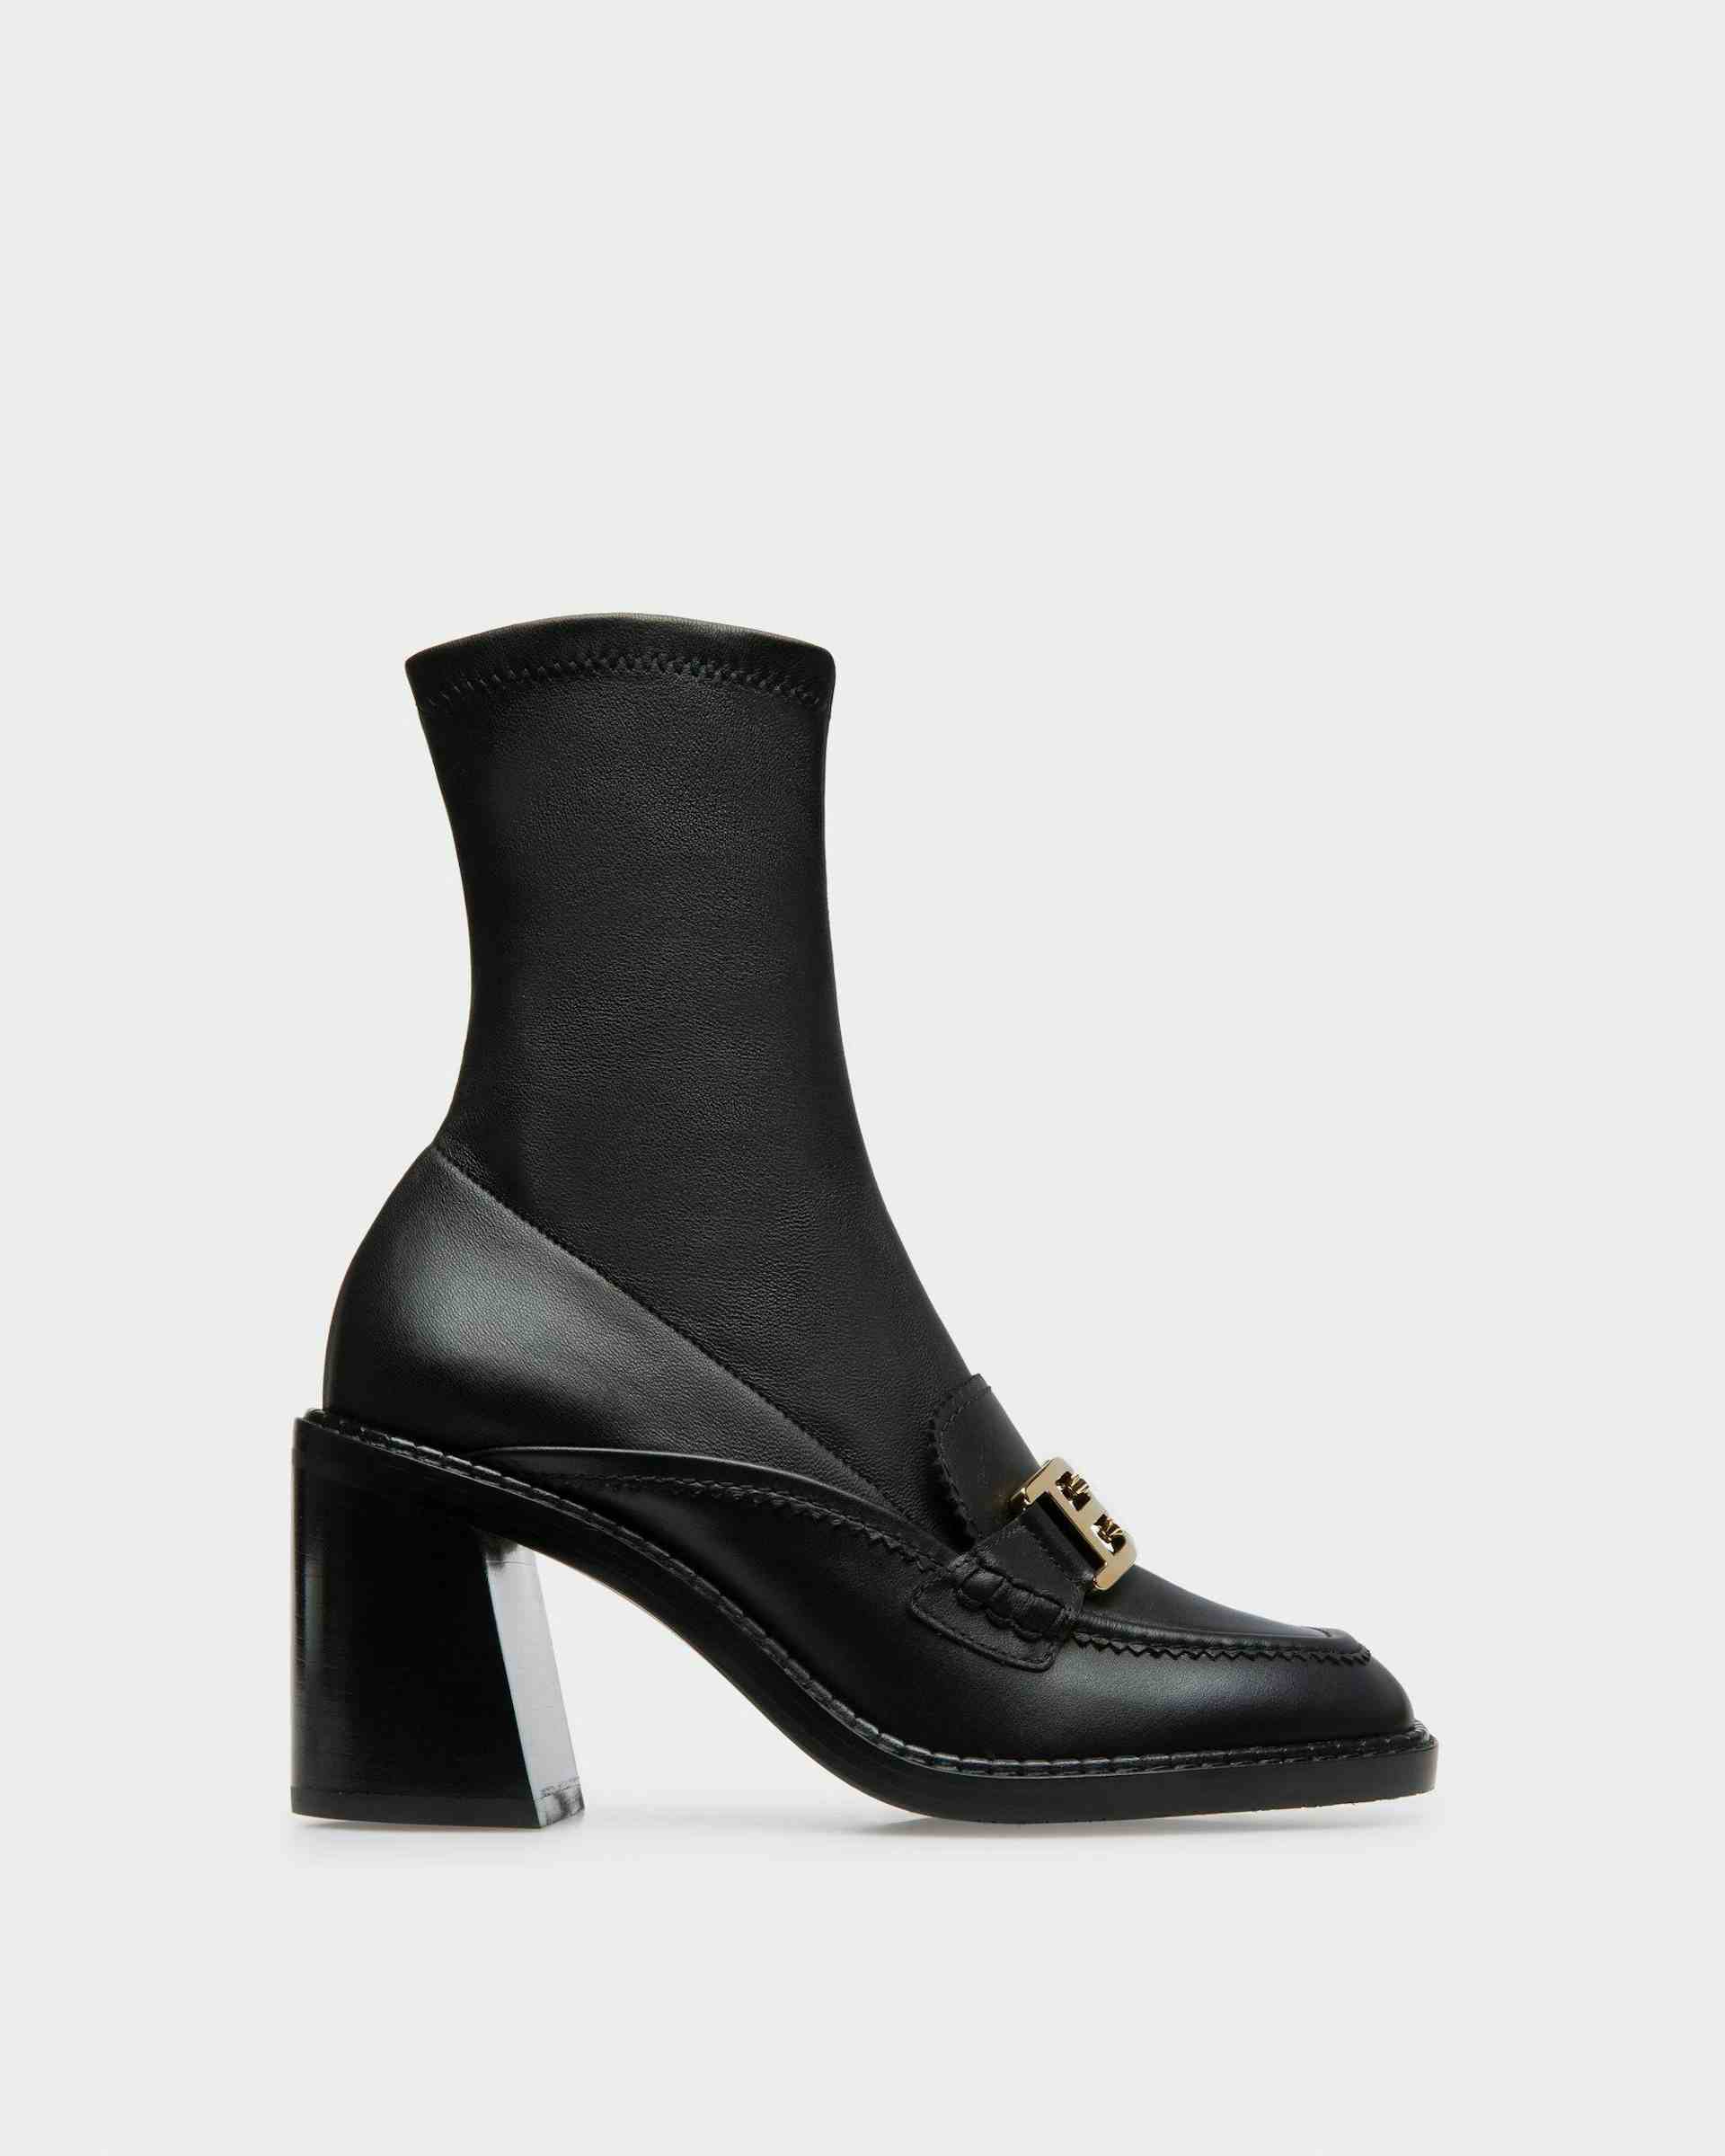 Enzy Leather Booties In Black - Women's - Bally